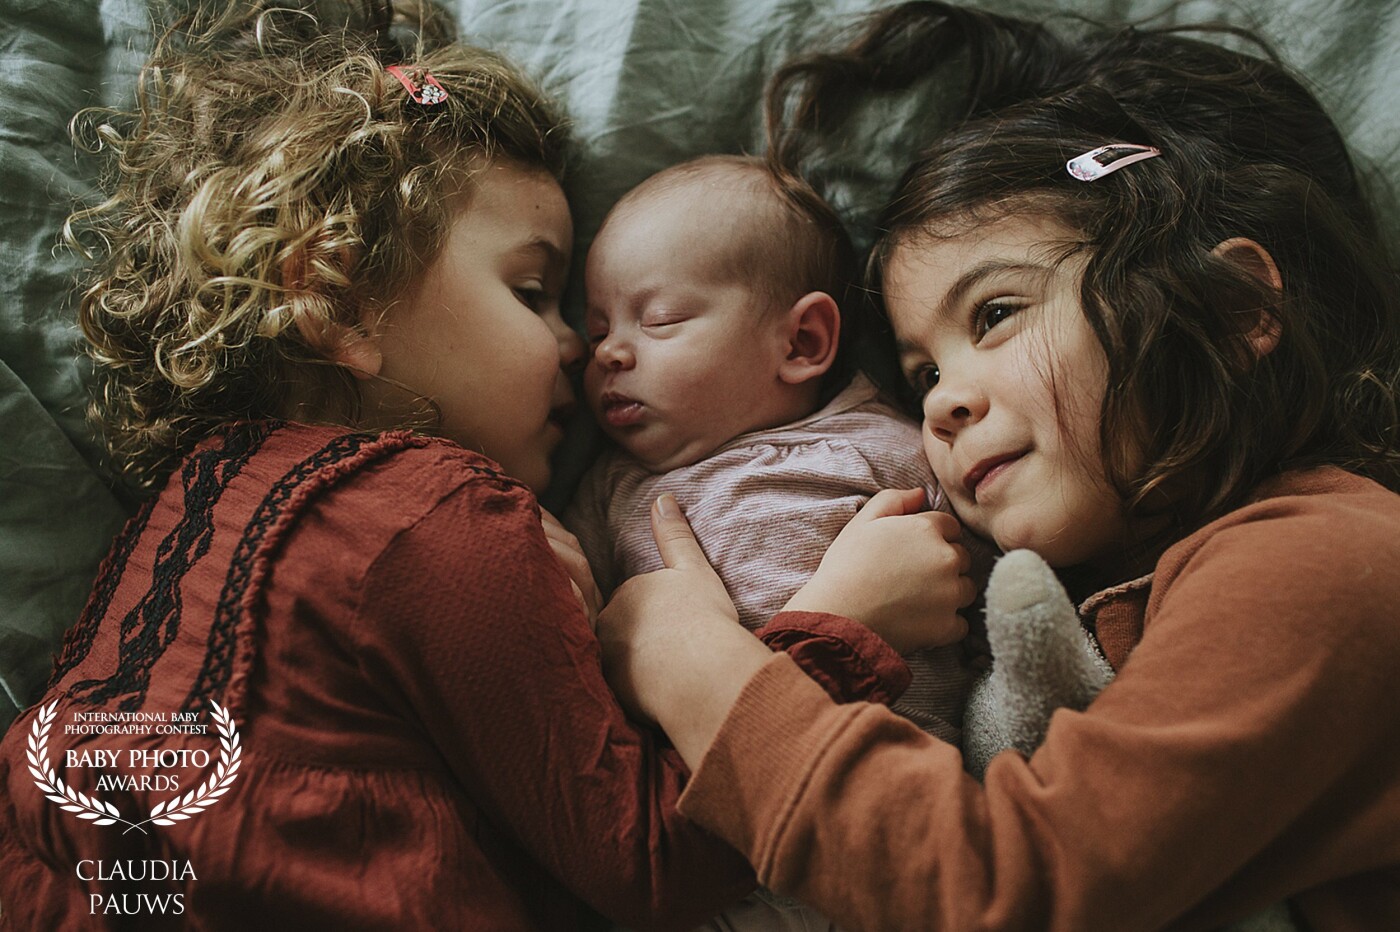 The parents of these three lovely girls had been waiting in suspense for their newborn baby. Because of complications that arose during the birth of one of their older daughters they made sure to enjoy the wonderful small moments with their children even more. It's wonderful to see how tender these girls are towards their baby sister! 